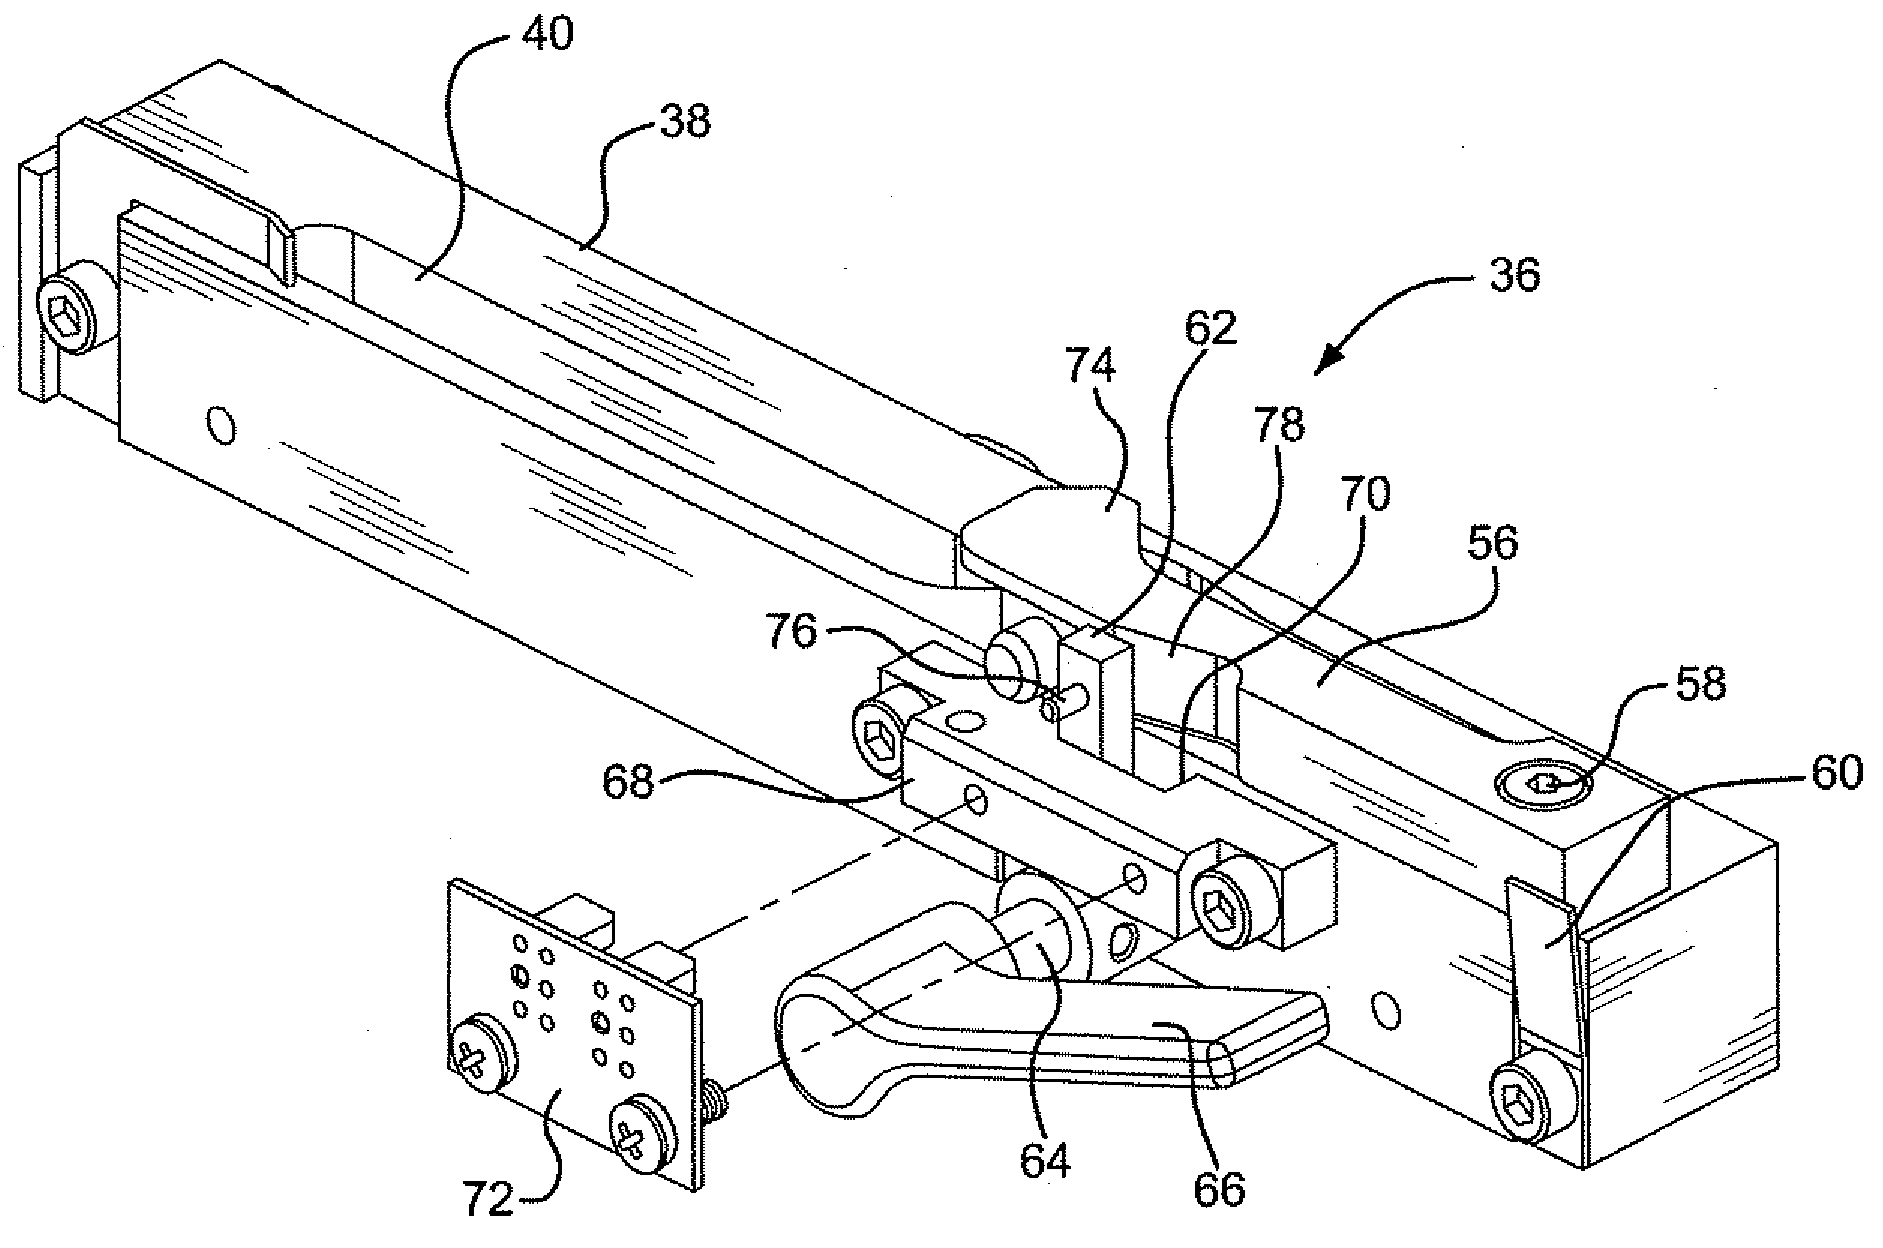 Clamp locking mechanism in device for welding plastic tubes